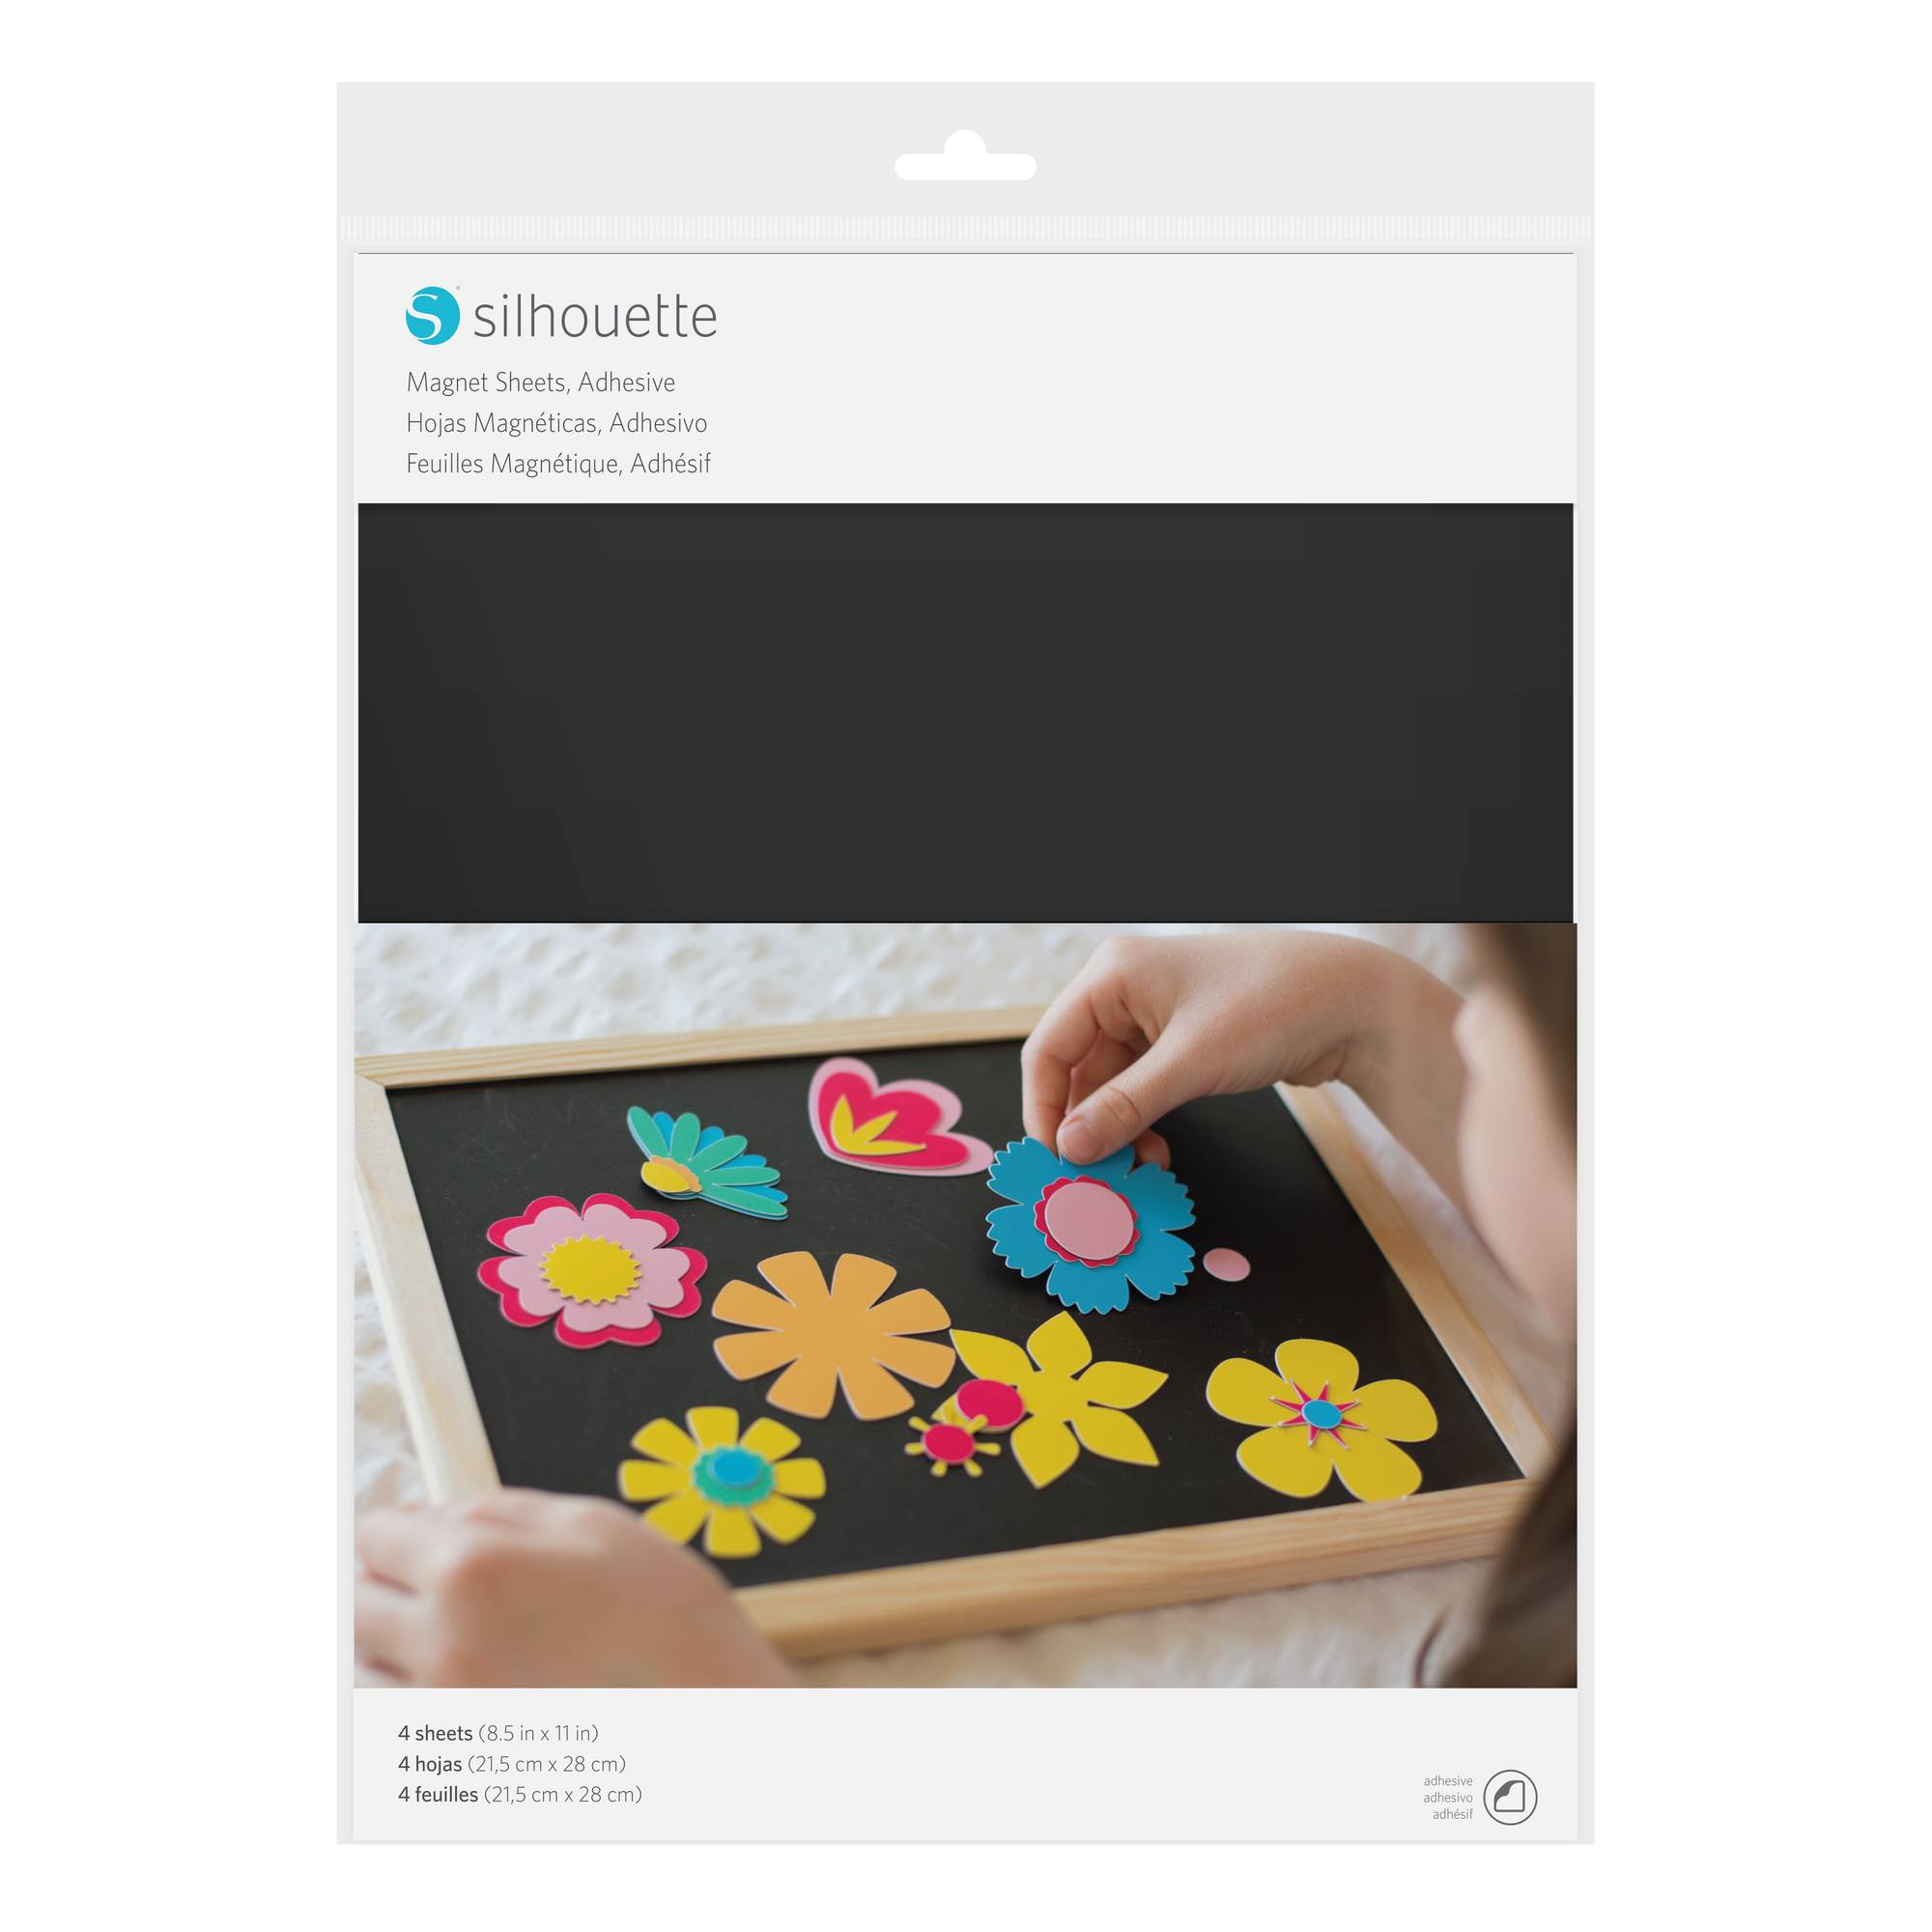 Silhouette Magnets Tutorial & Review - Silhouette School